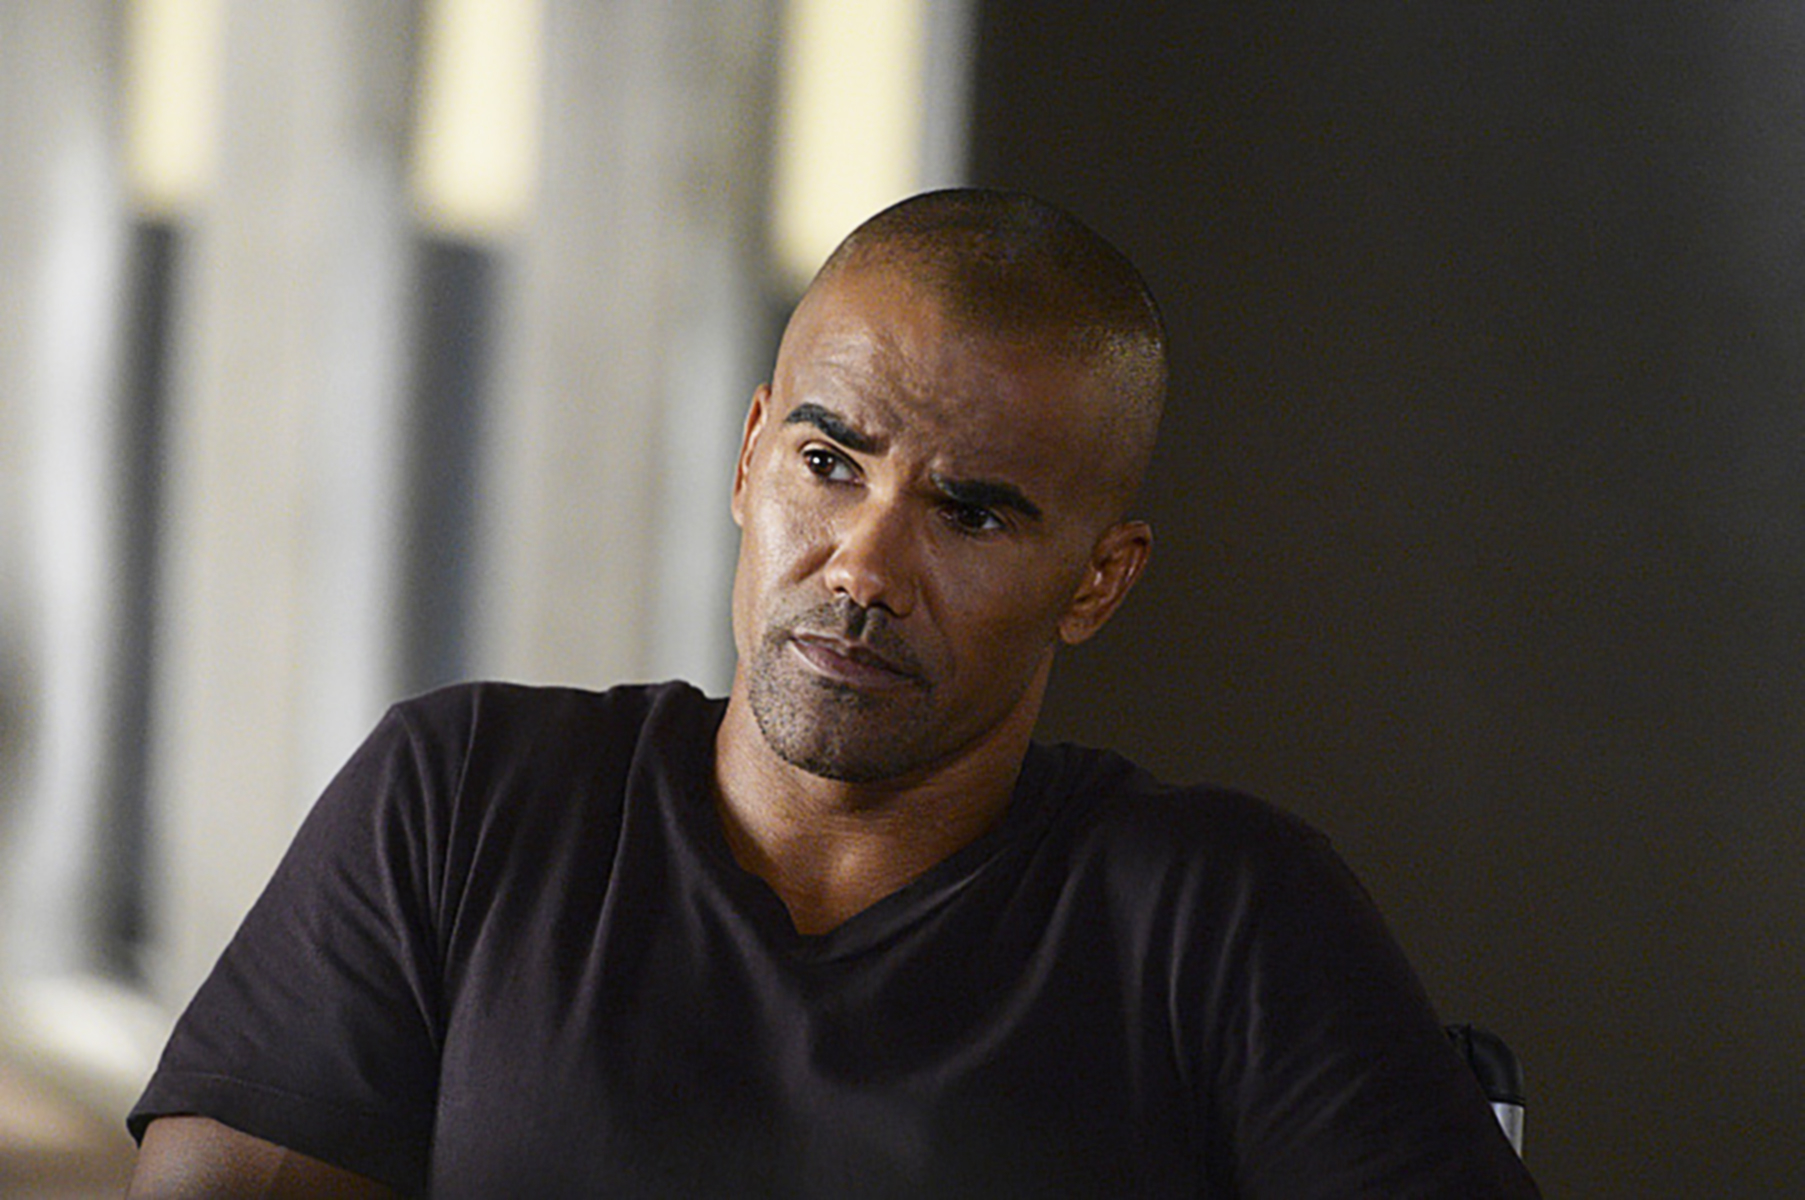 Shemar Moore as Derek Morgan in a scene from Criminal Minds, looking concerned